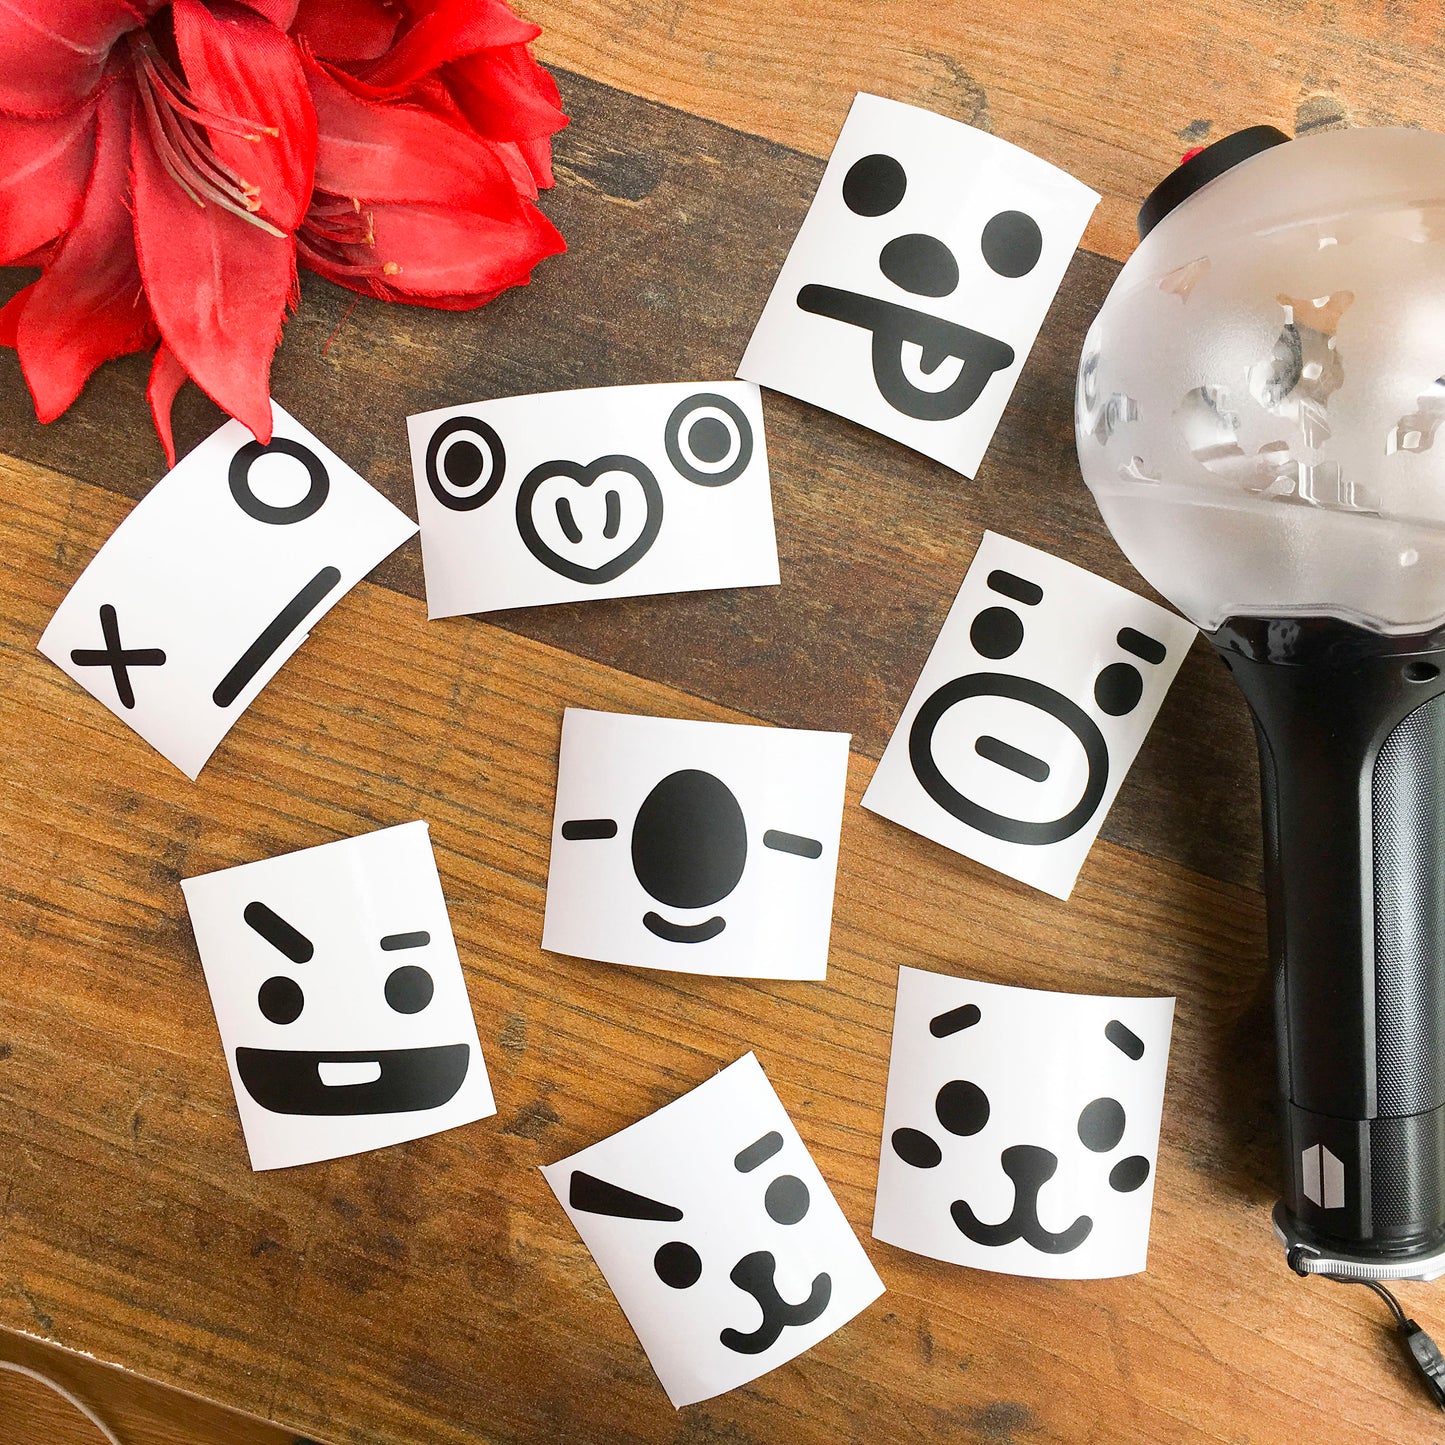 BTS Character FACES Army Bomb Lightstick Kpop Decal Sticker